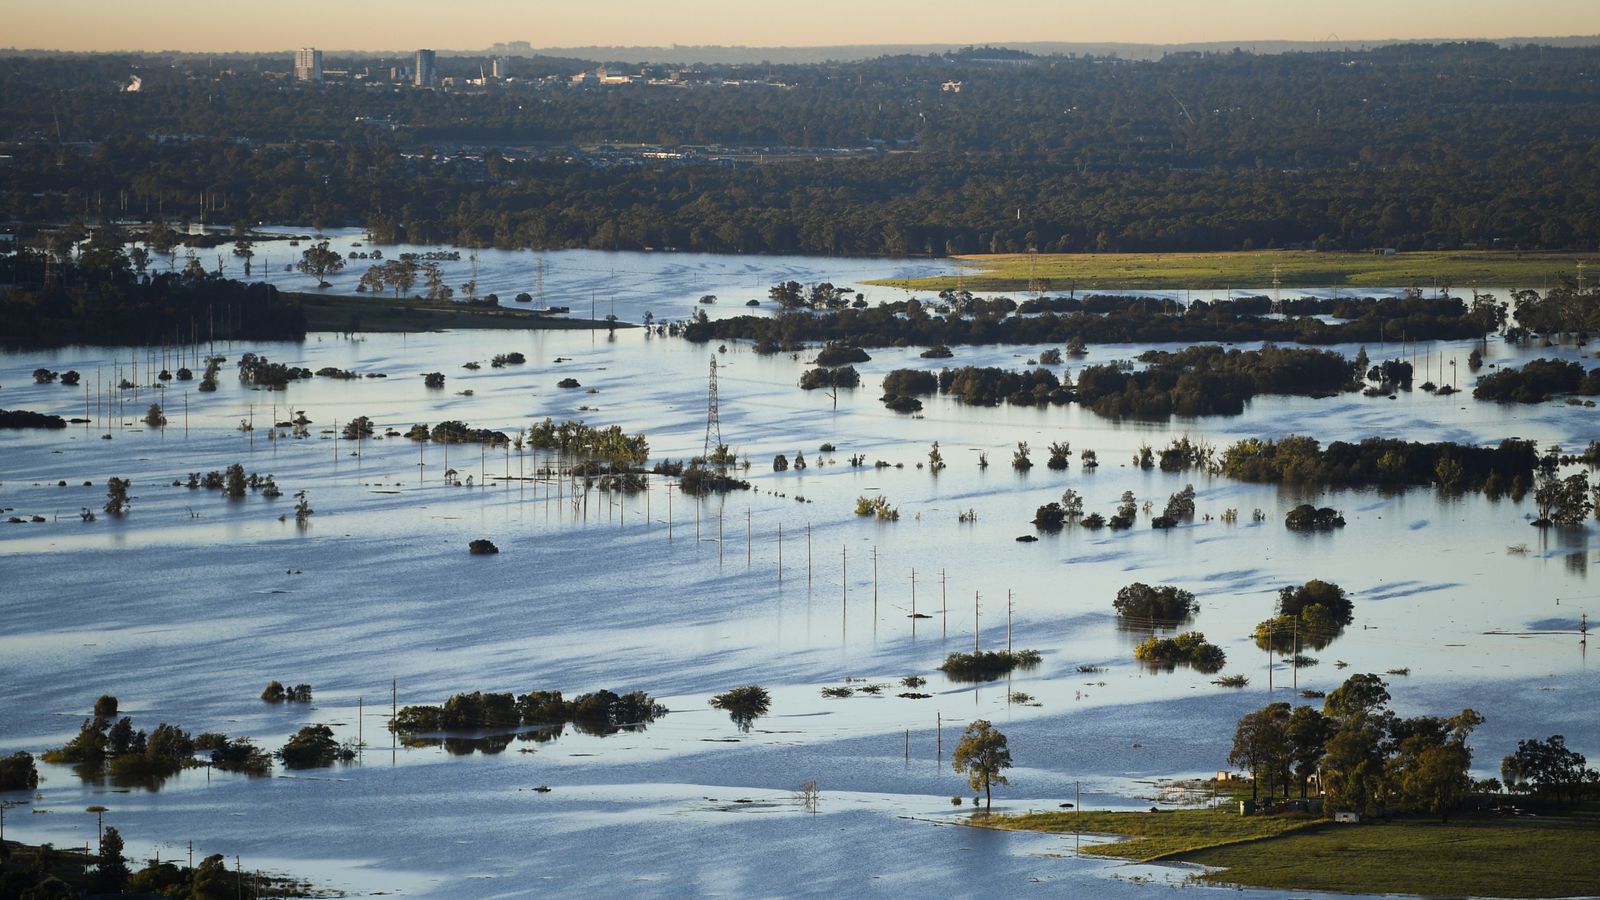 Australia floods Two people found dead amid fresh warnings over rising